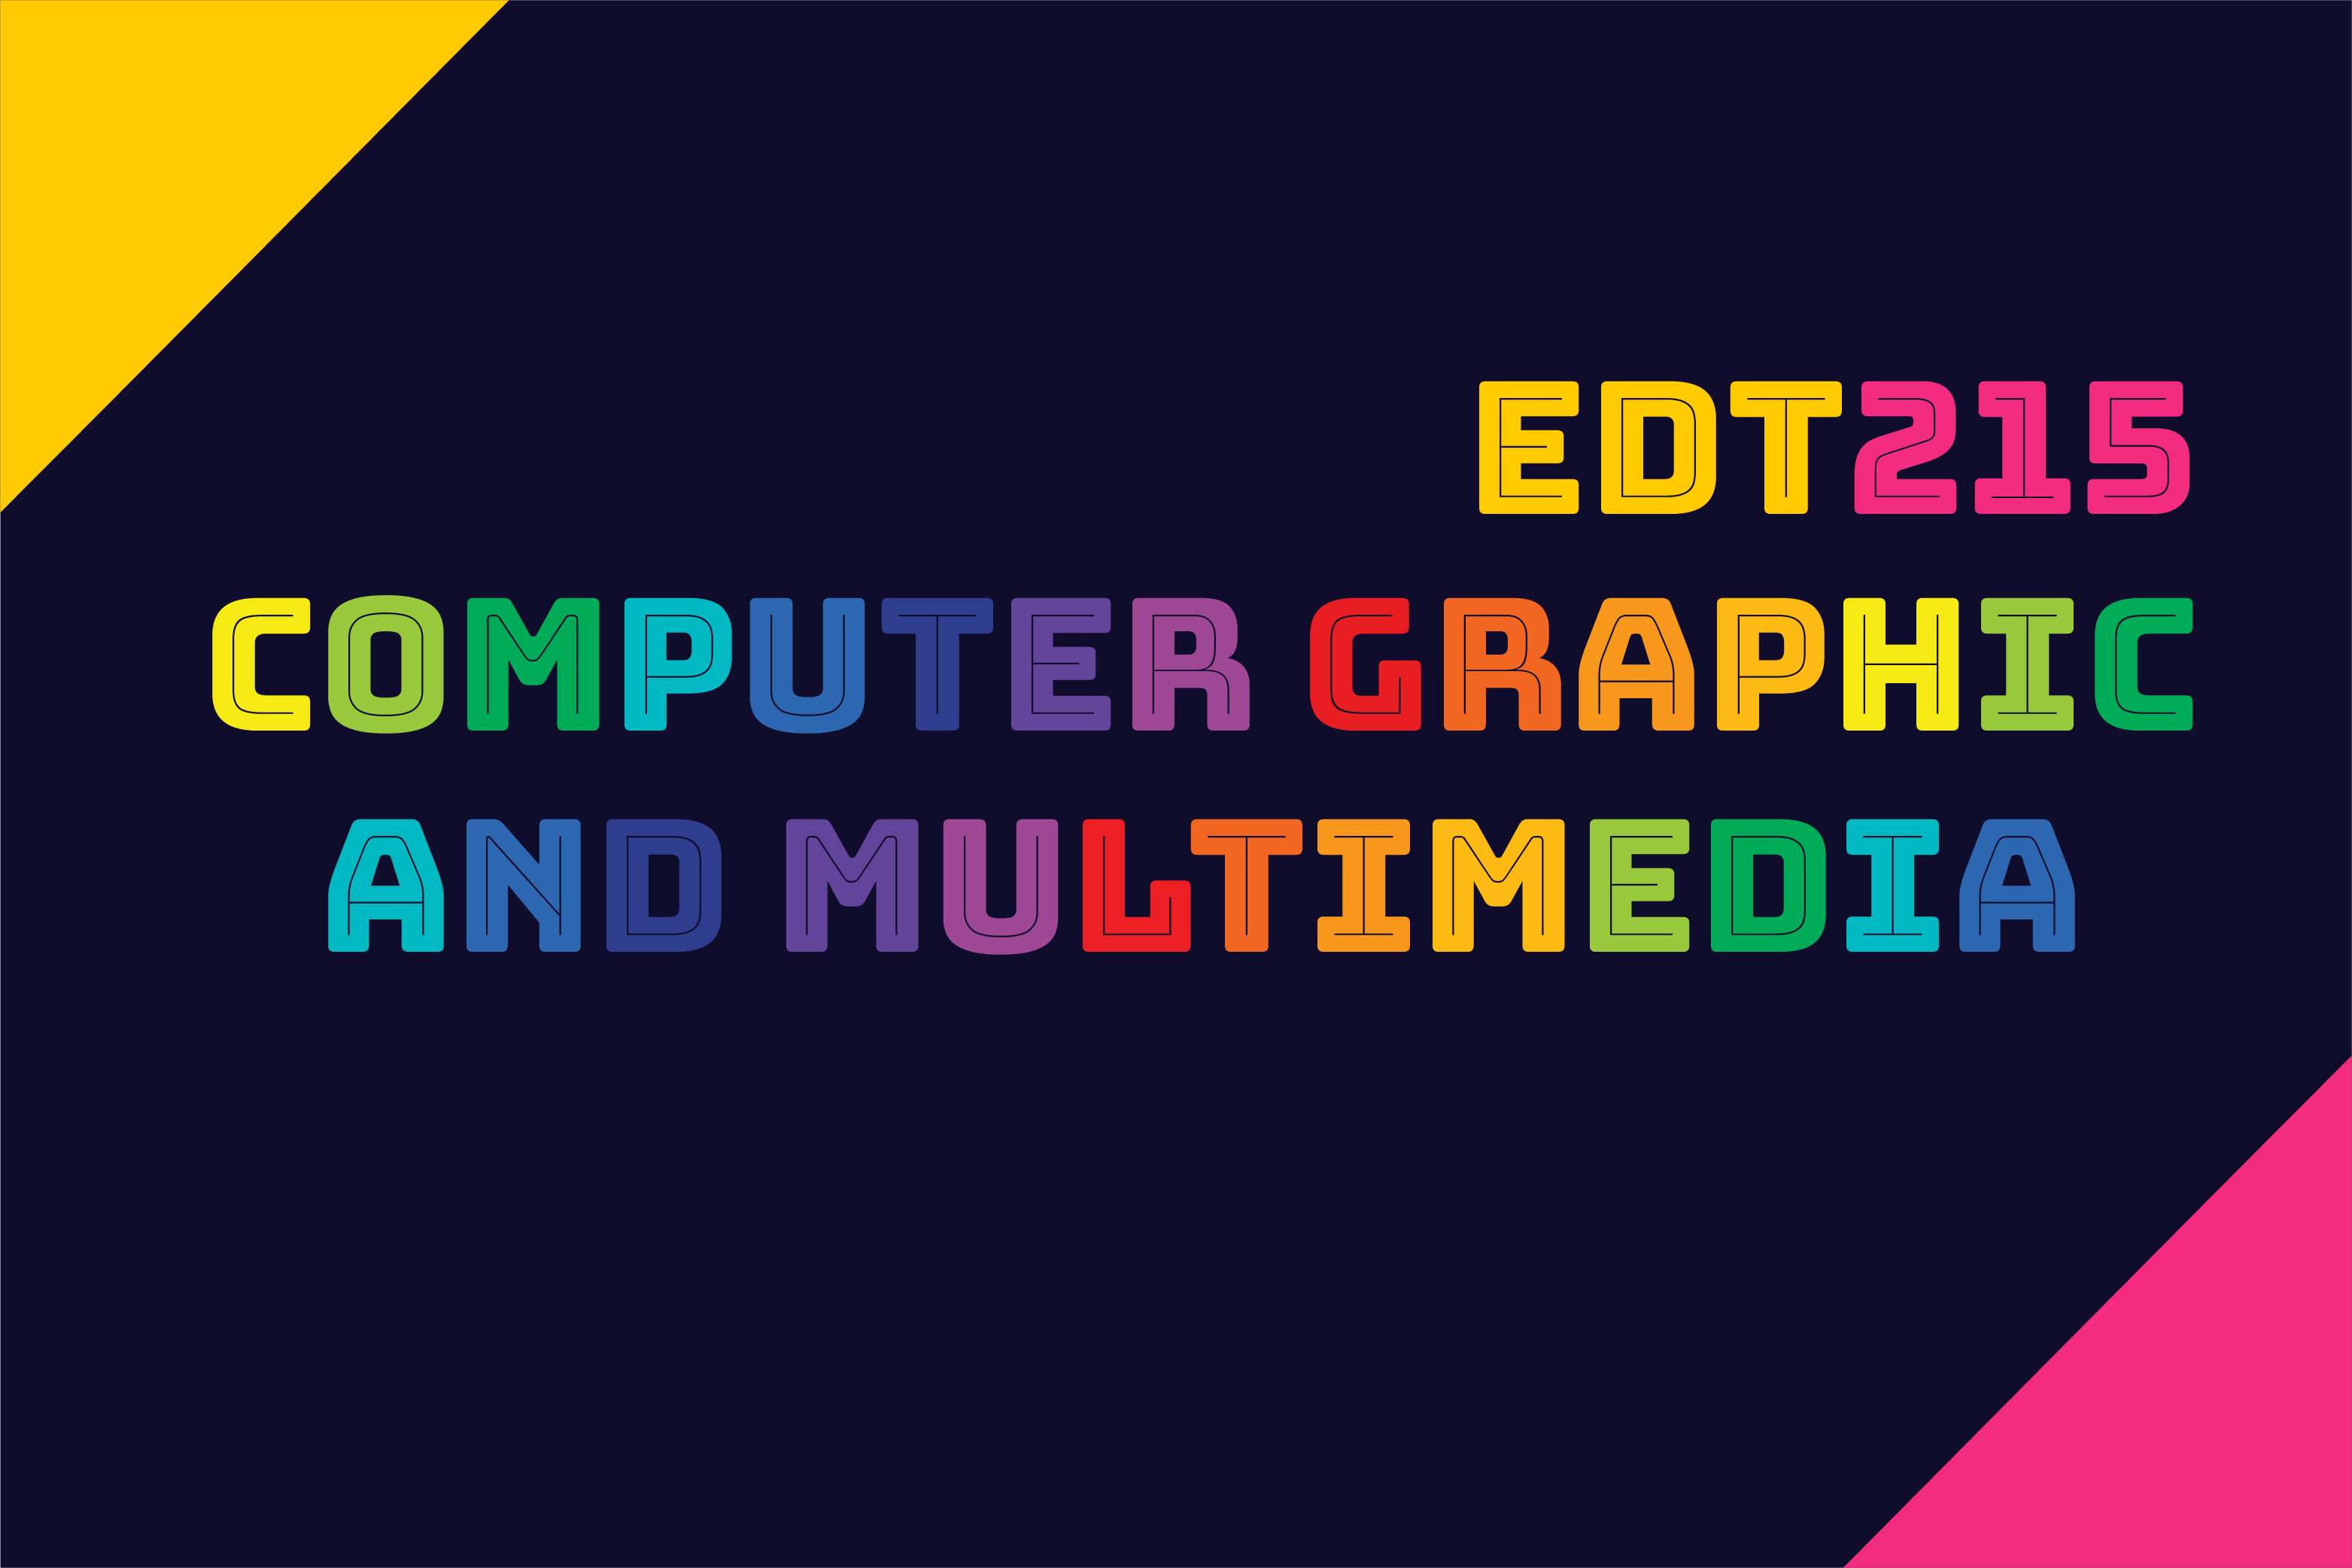 EDT215 COMPUTER GRAPHIC AND MULTIMEDIA